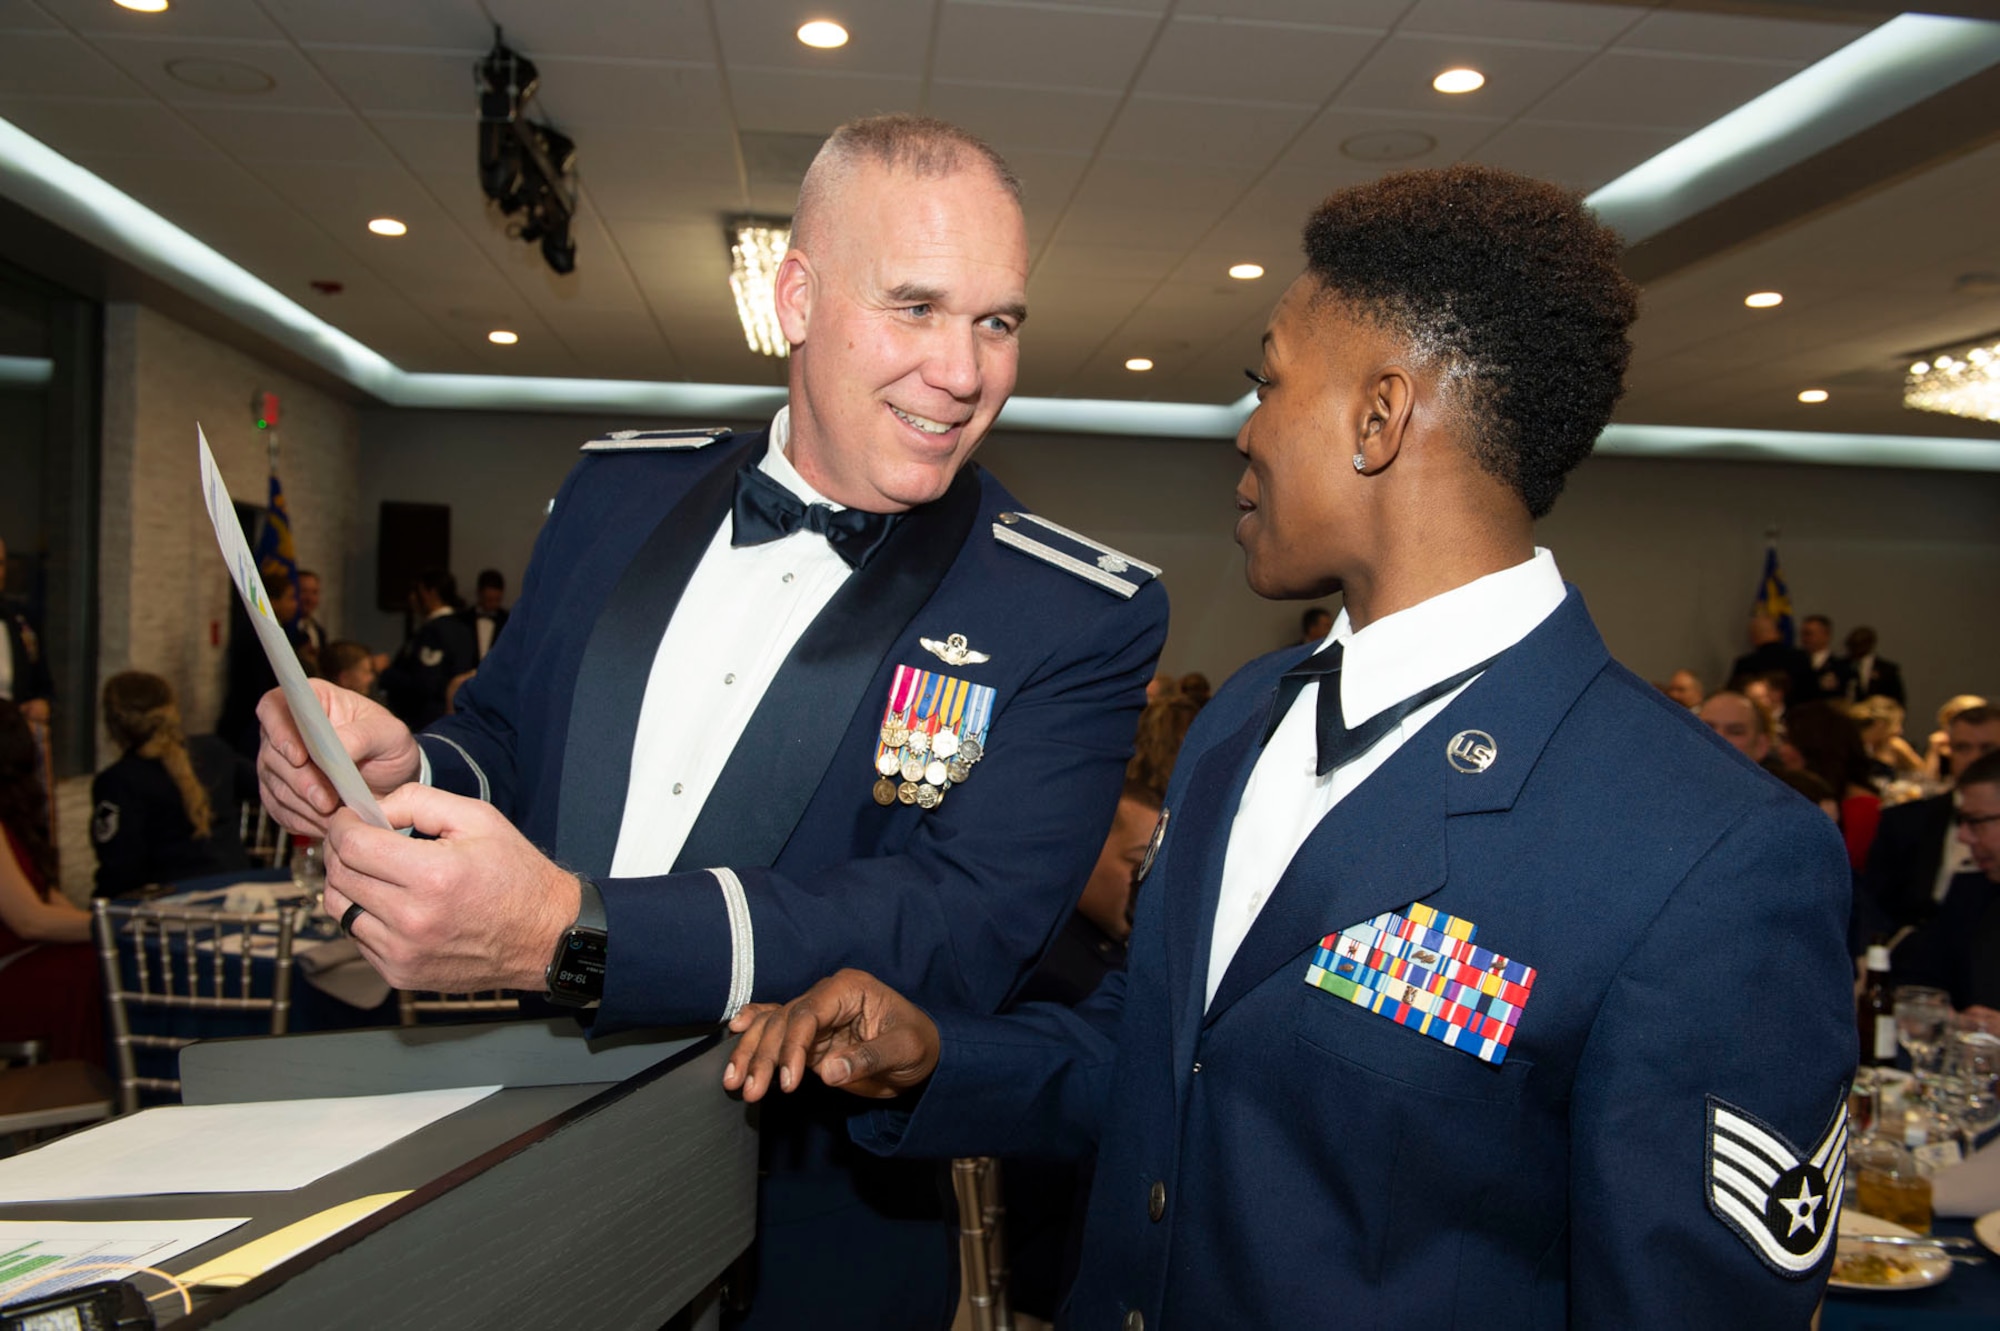 Lt. Col. Brian Thompson, 74th Air Refueling Squadron and Staff Sgt. Alexis Wilson, 434th ARW chaplain's assistant, go over the event schedule. The two served as the masters of ceremony for the 80th Anniversary Ball. Photo by Master Sgt. Rachel Barton.